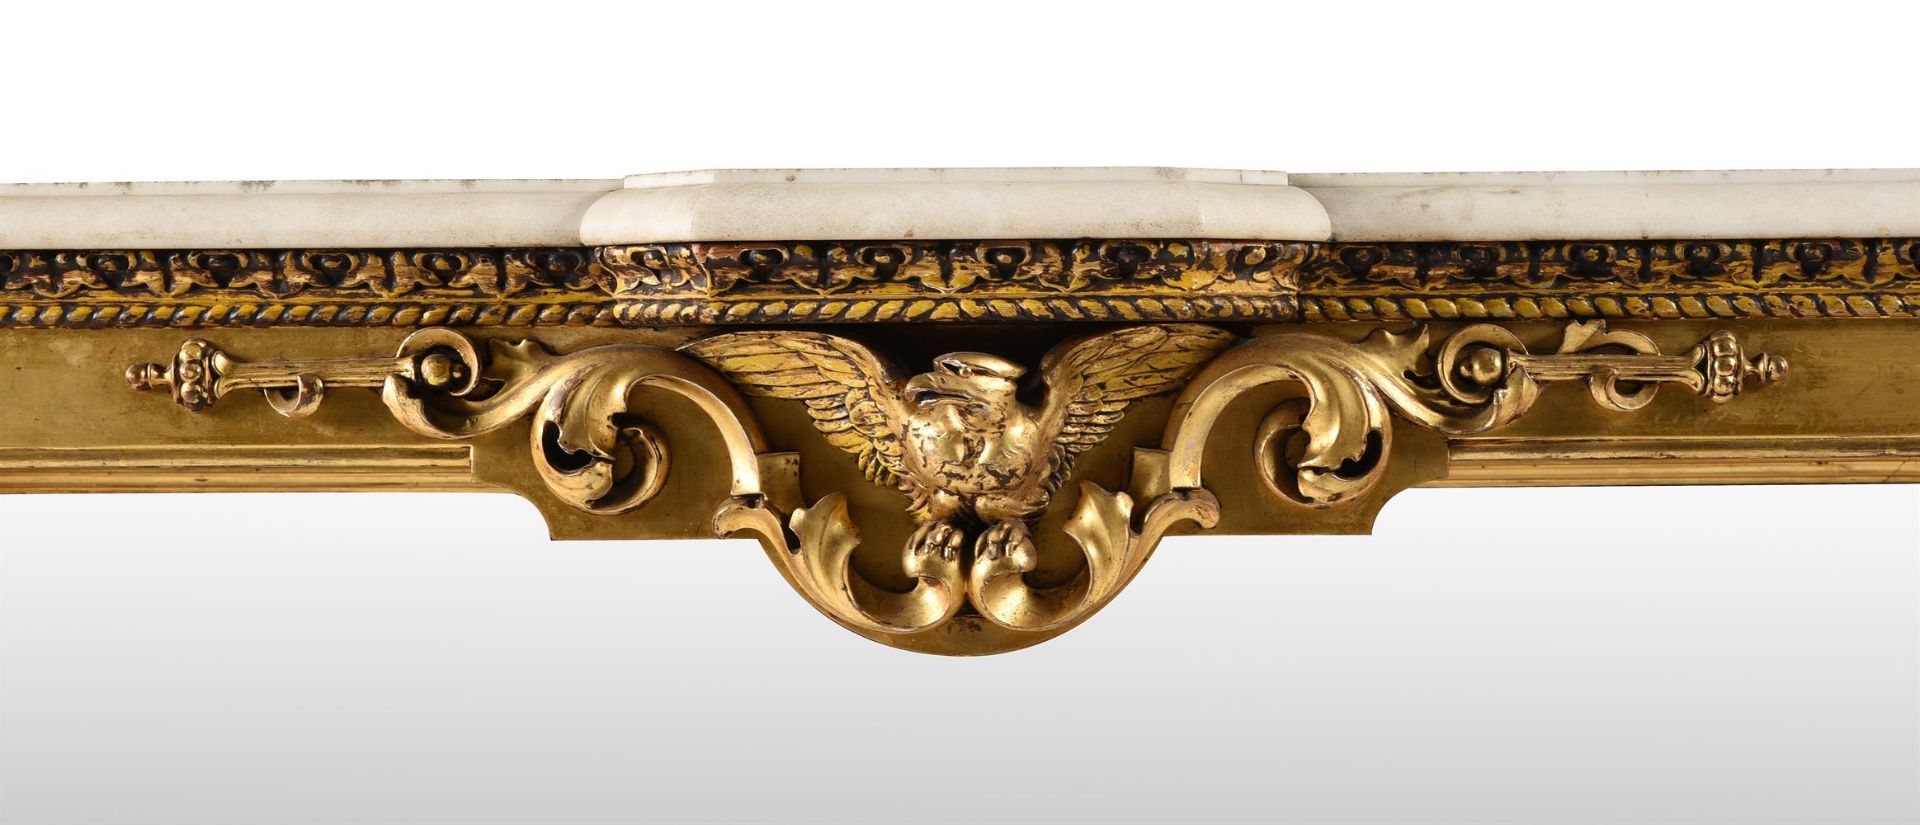 A VICTORIAN GILTWOOD AND AMBOYNA CONSOLE TABLELATE 19TH CENTURY - Bild 3 aus 3